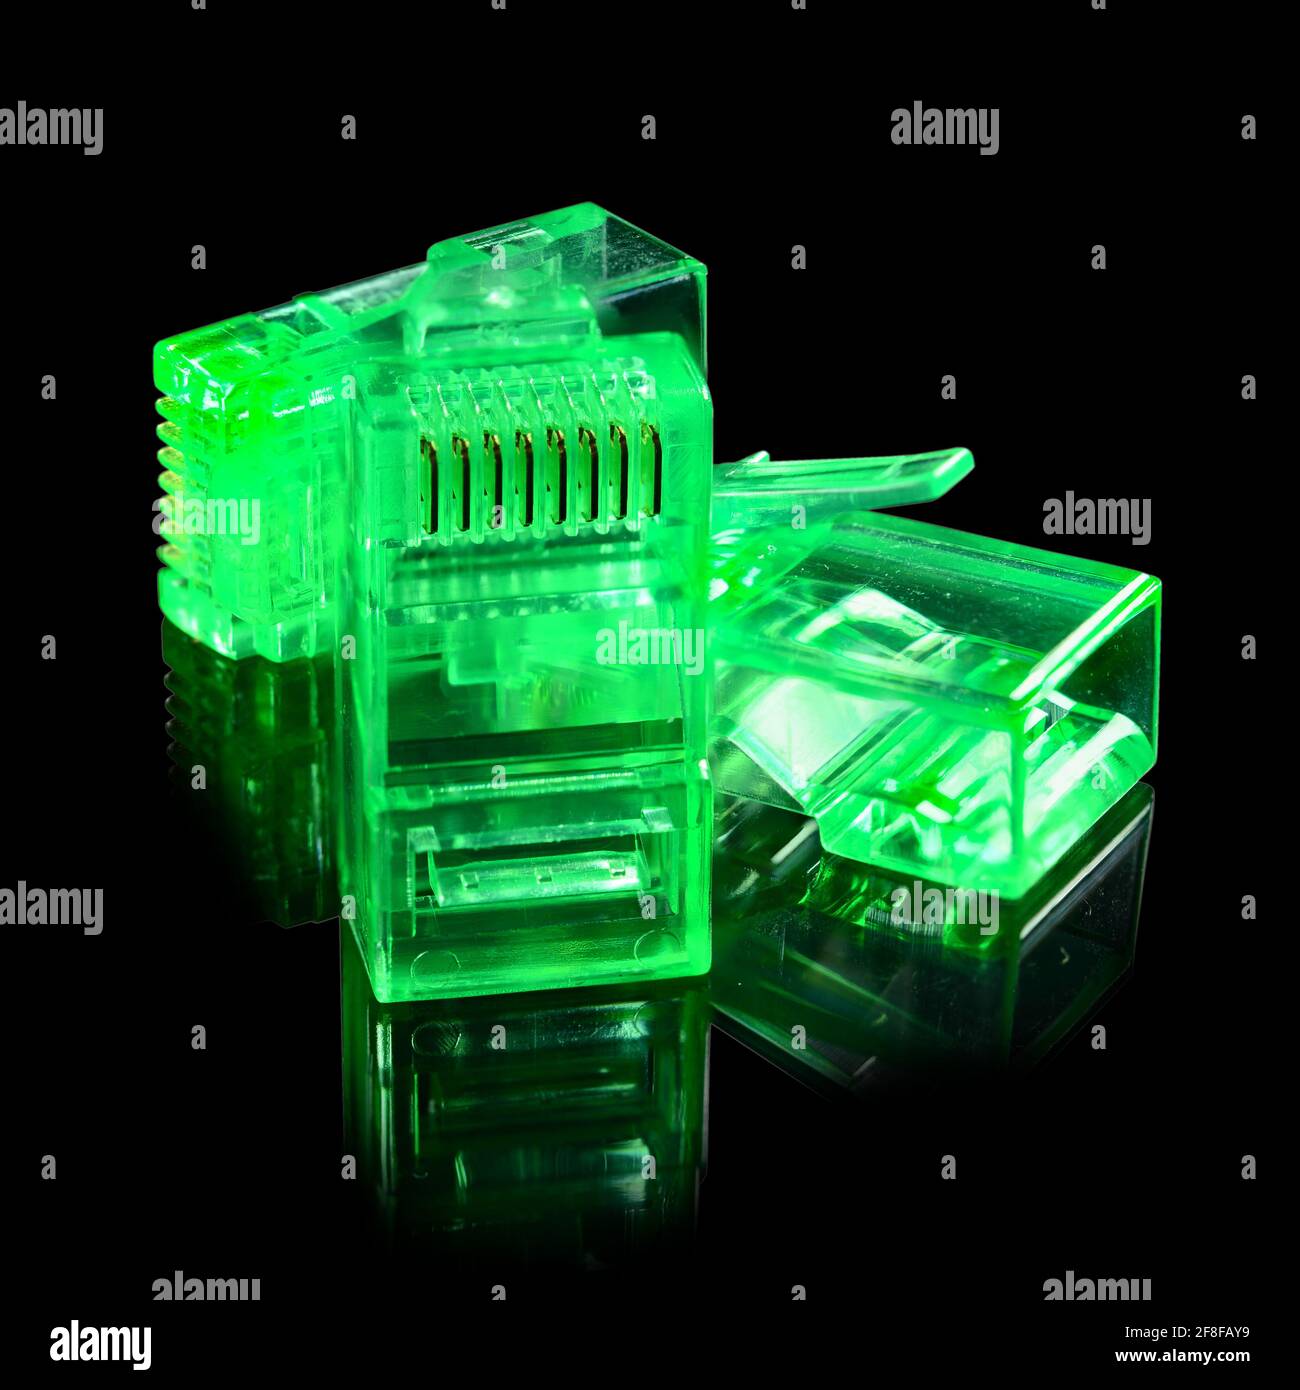 Connector rj-45. Three neon green transparent connectors rj45 for network and internet. Close up macro isolated on black background with reflection. Stock Photo